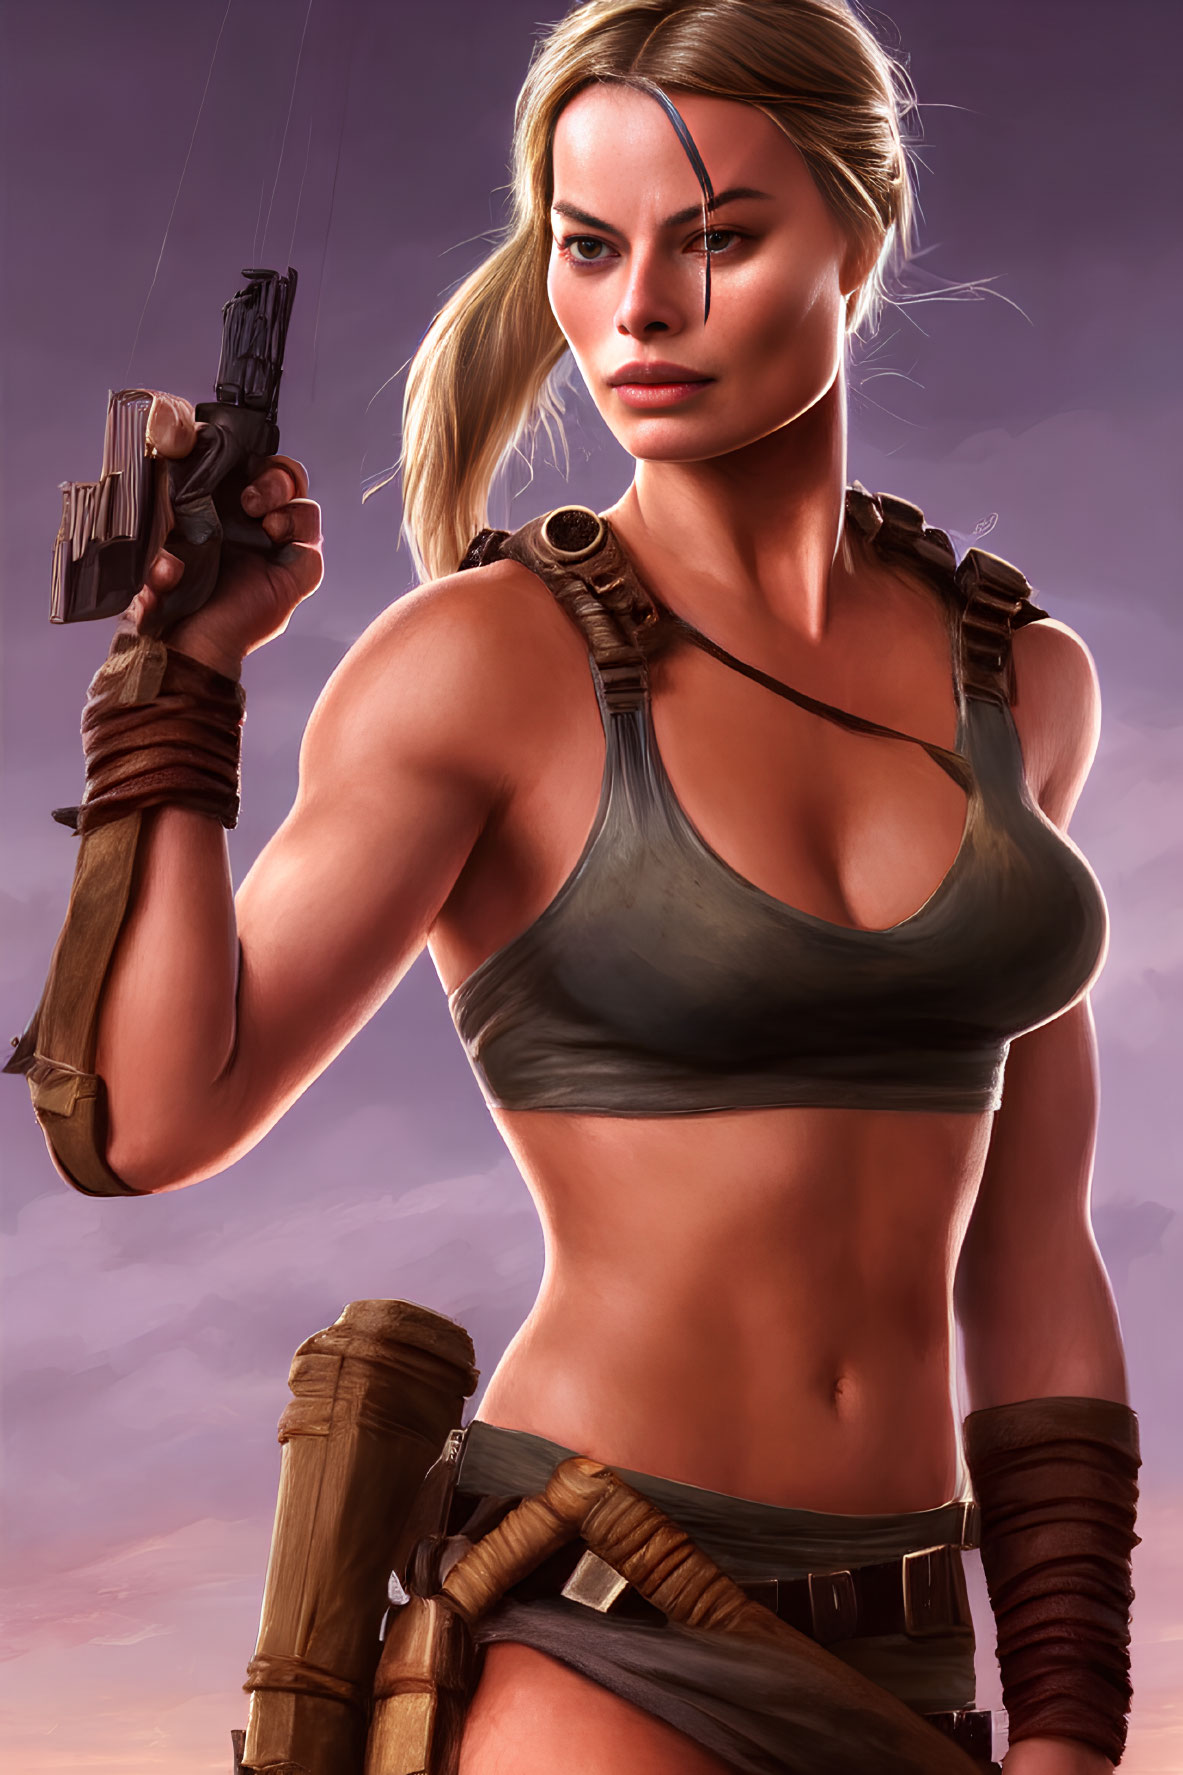 Blonde woman with pistol in tank top and gloves